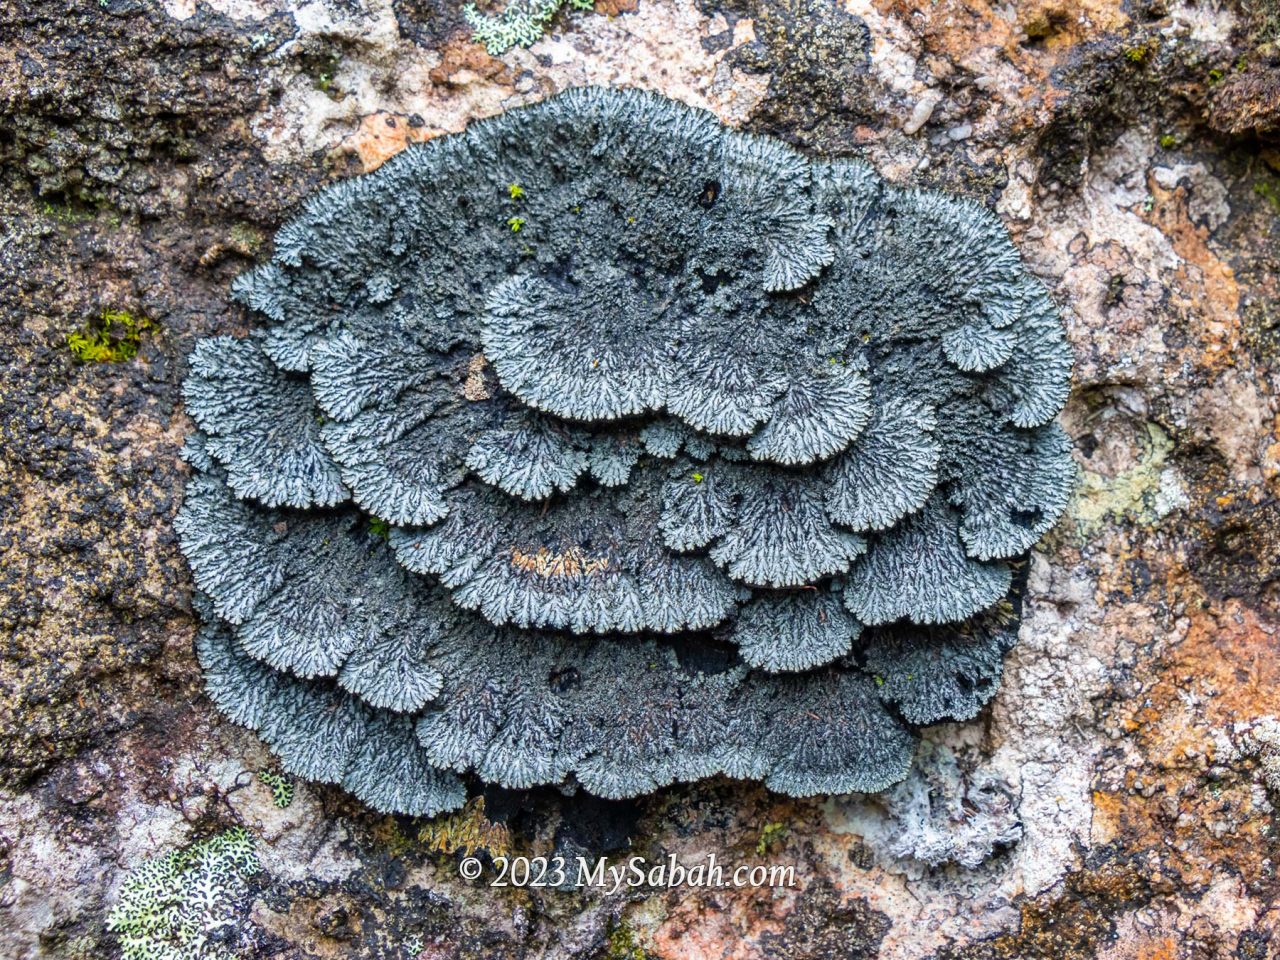 A big and black lichen which is made up from algae and fungus